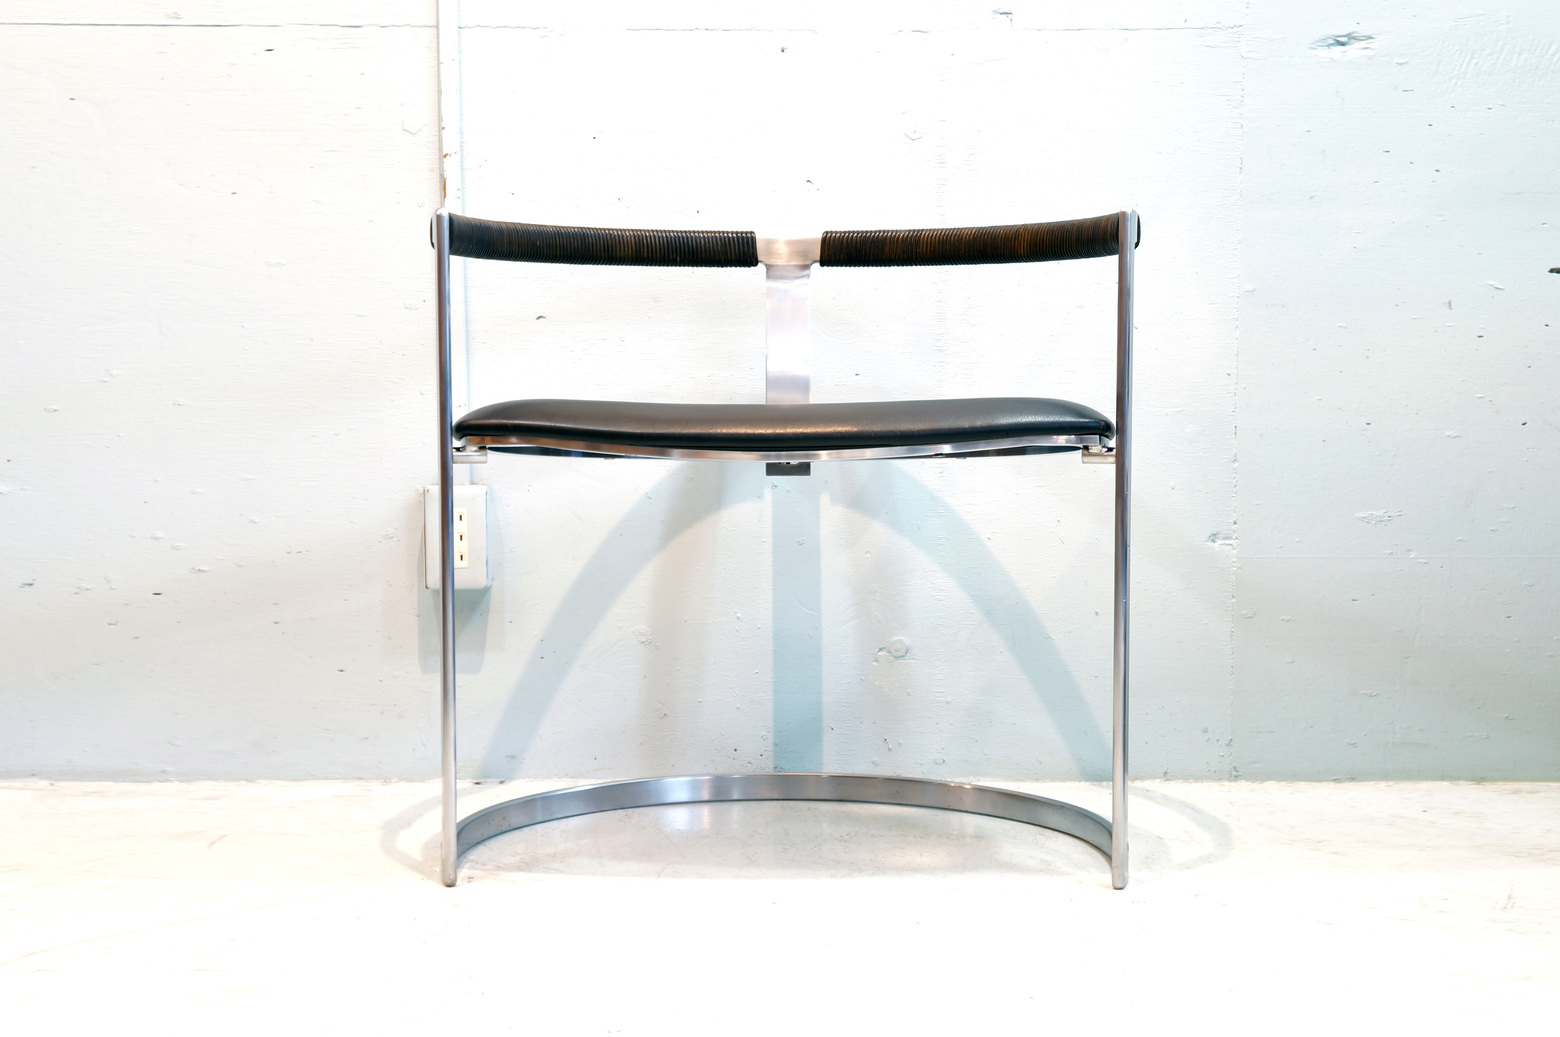 bo-ex model 591 FK collection Sculpture chair design by PREBEN FABRICIUS and JORGEN KASTHOLM Made in Denmark 1964 mobilia / ボーエックス スカルプチャーチェア プレベン・ファブリシャス ヨルゲン・カストホルム デザイン モビリア デンマーク